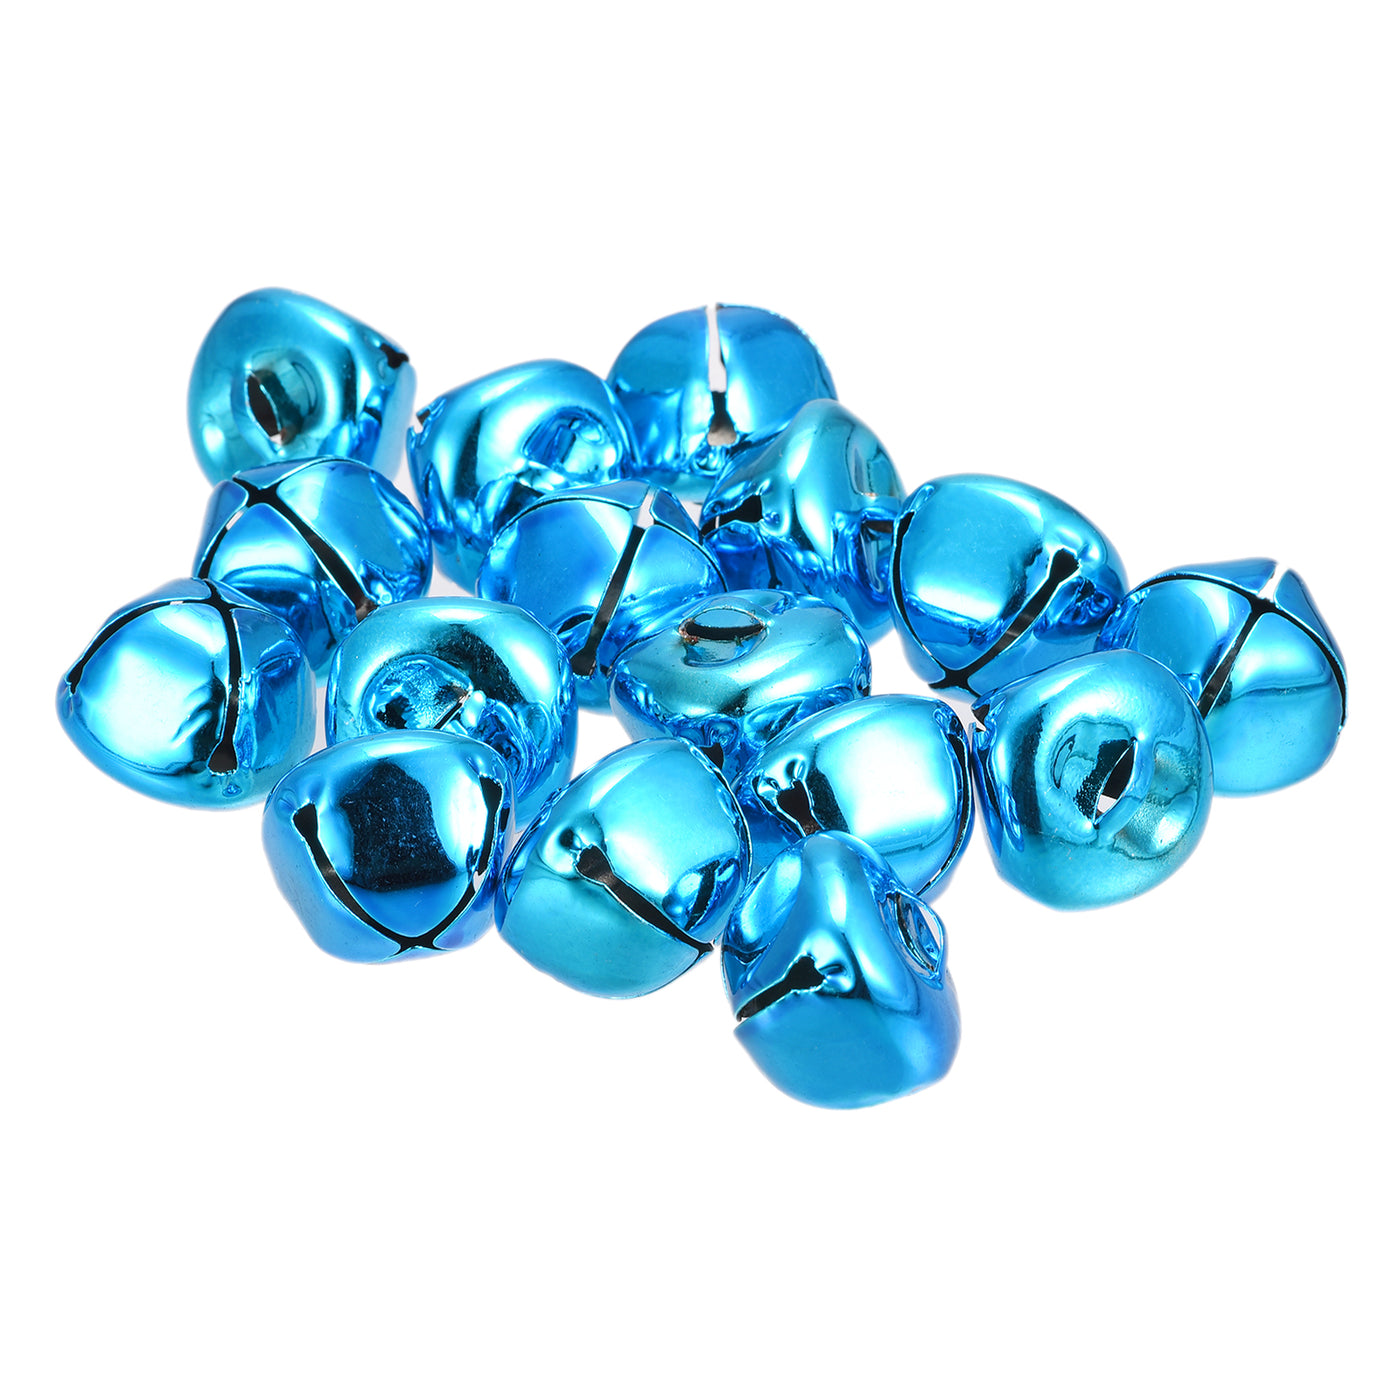 Uxcell Uxcell Jingle Bells, 24mm 48pcs Carbon Steel Craft Bells for DIY Christmas, Blue